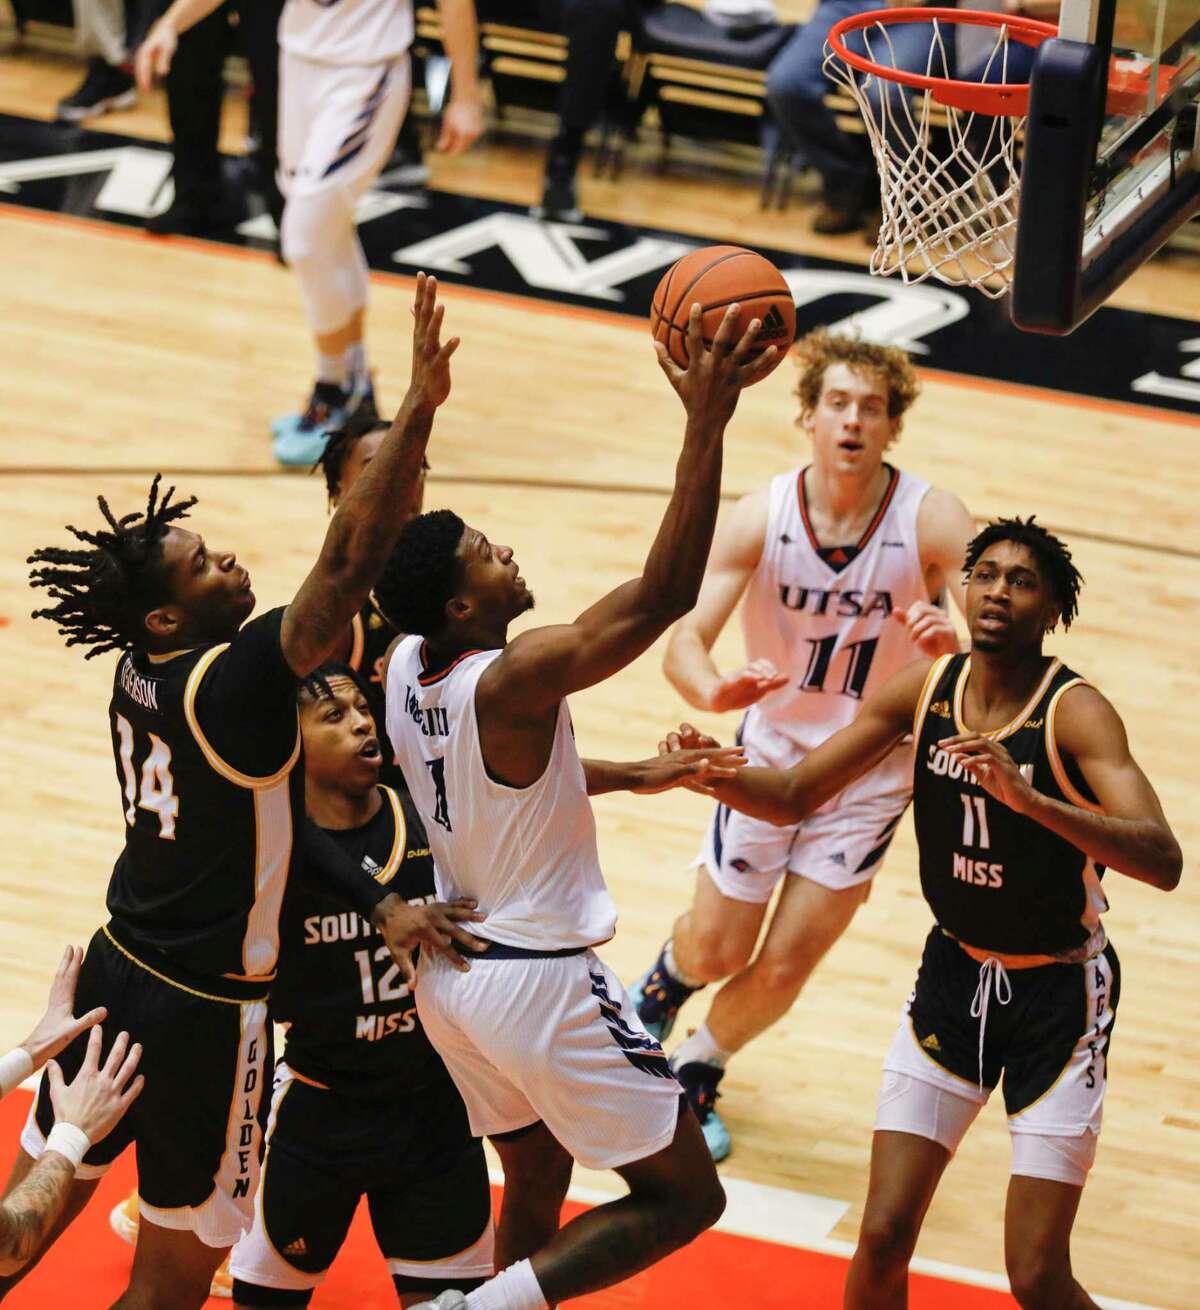 UTSA Roadrunners guard Darius McNeill (1) goes up for a shot during the first half against the Southern Miss Golden Eagles at the Convocation Center in San Antonio, Texas, Thursday, Jan. 6, 2022. The Roadrunners fell 74-73 to the Golden Eagles.